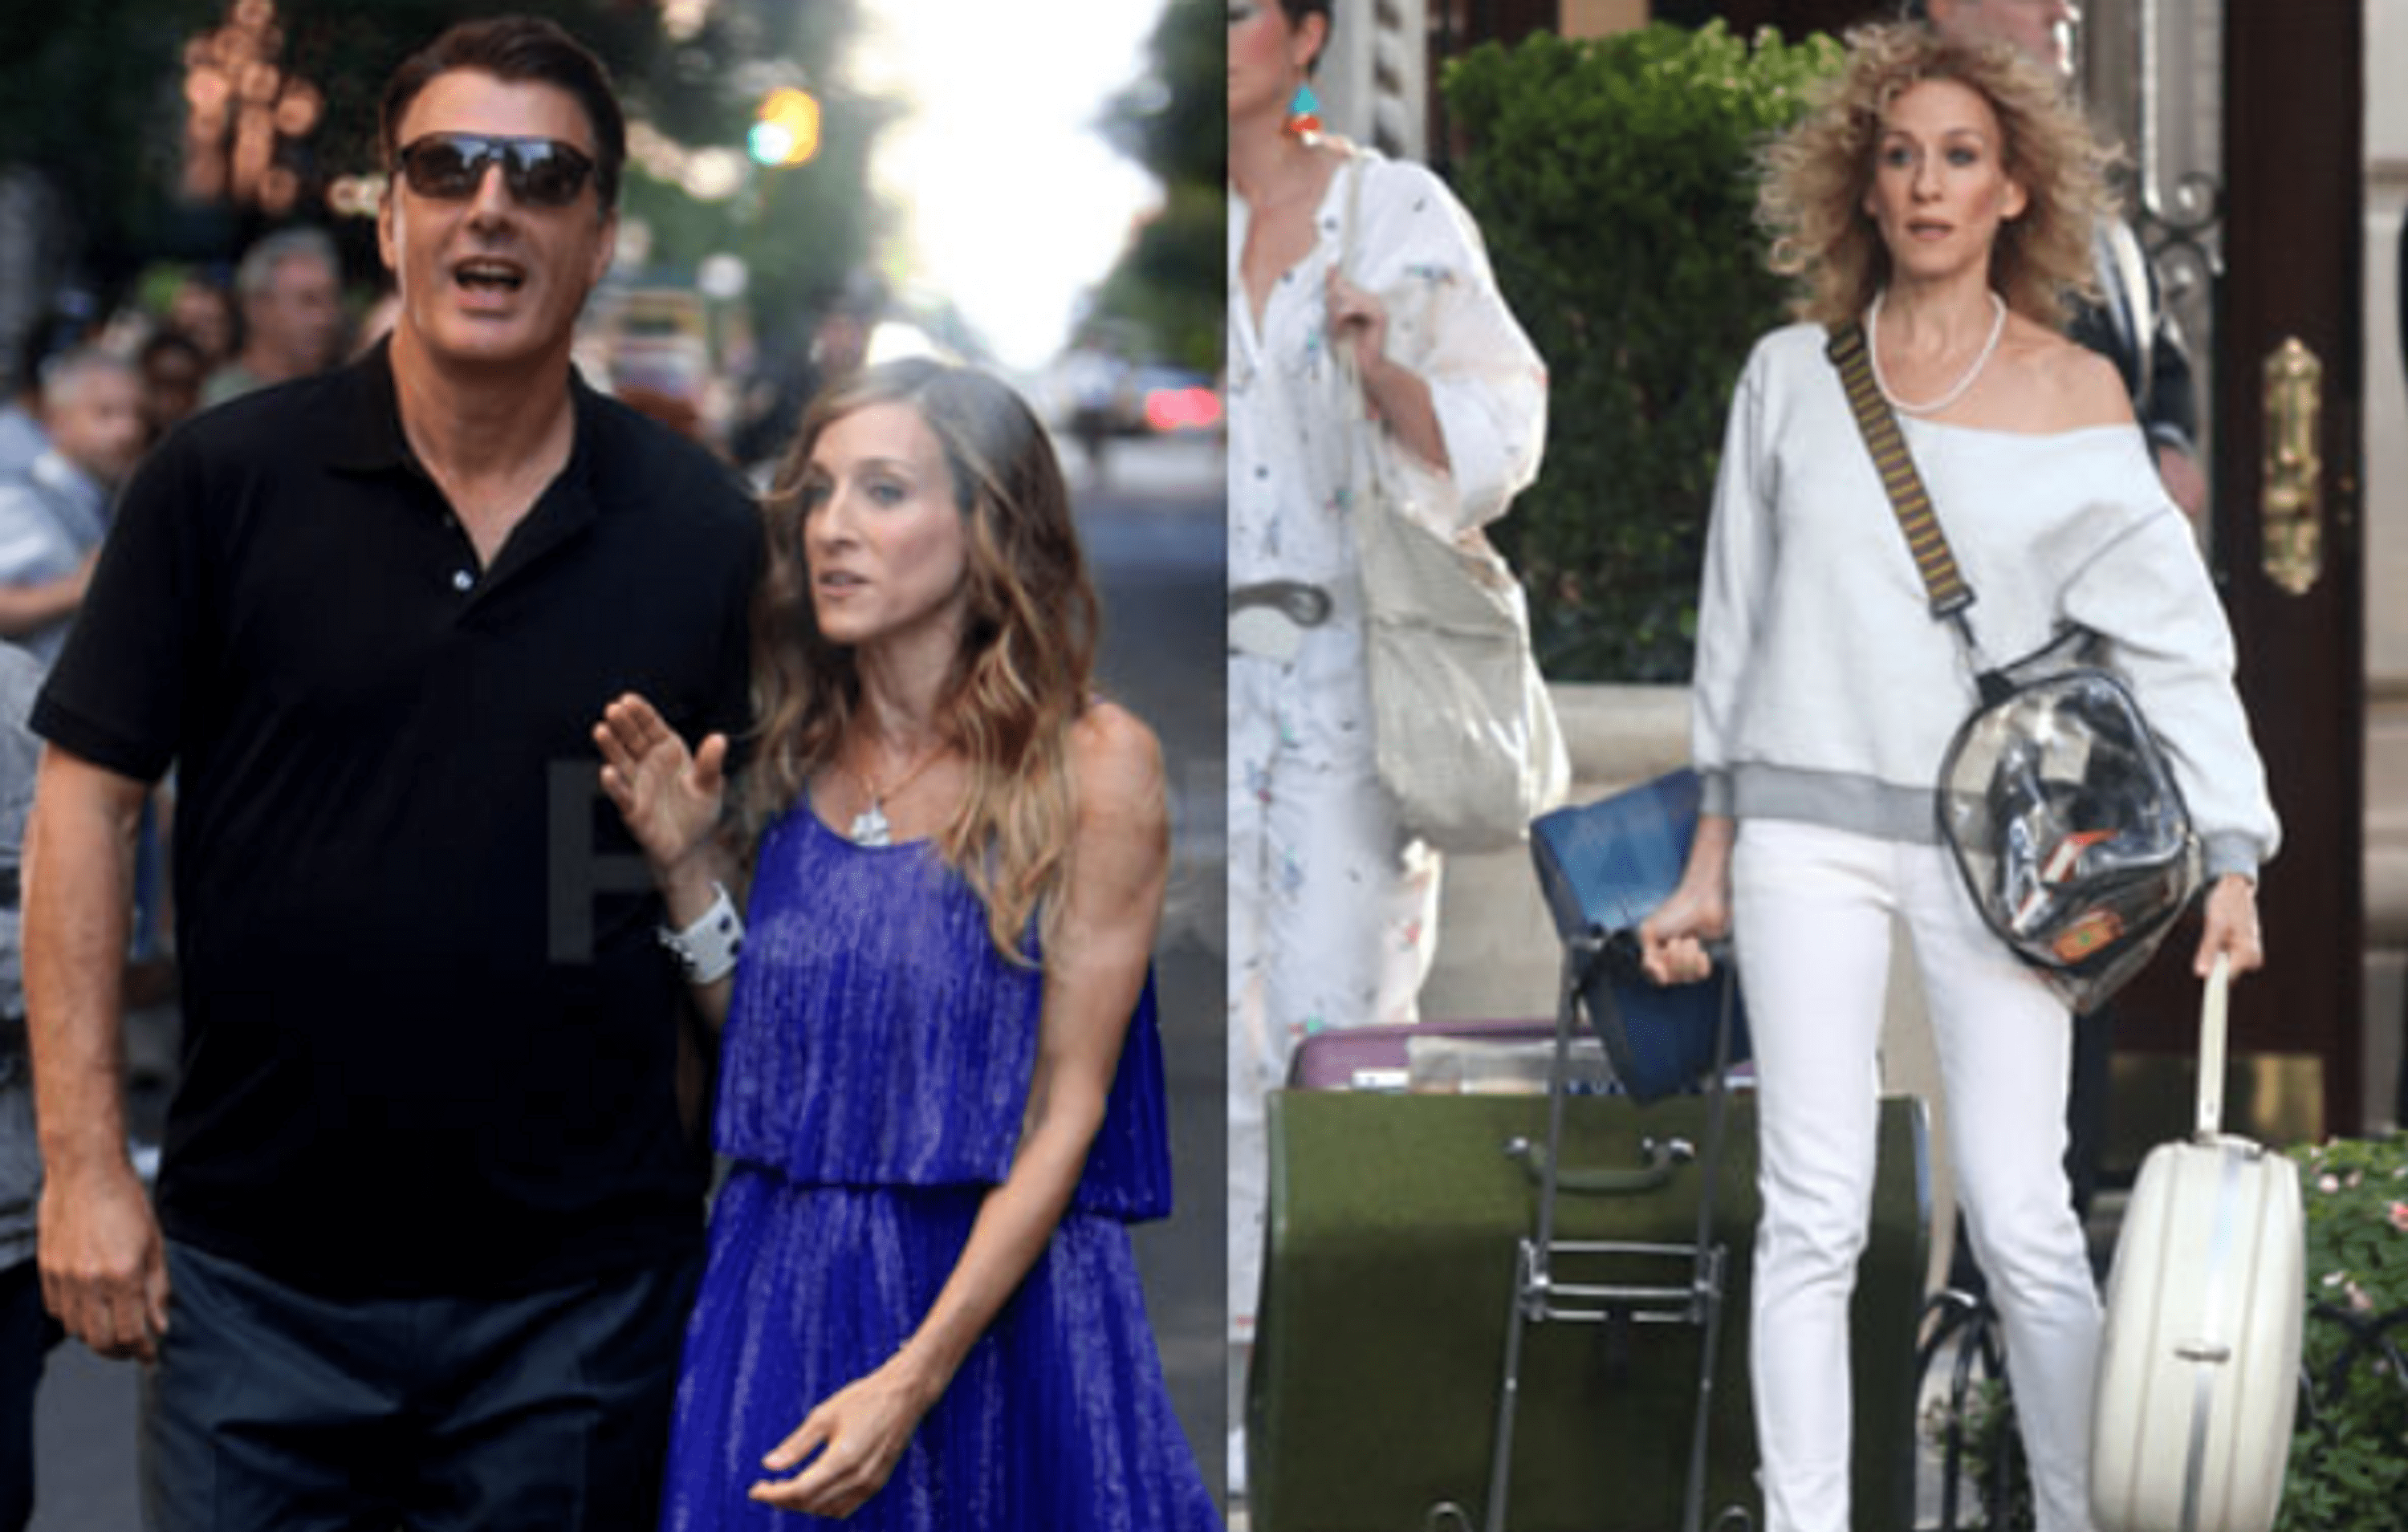 Sarah Jessica Parker admits she didn't talk to Chris Noth after allegations of violence